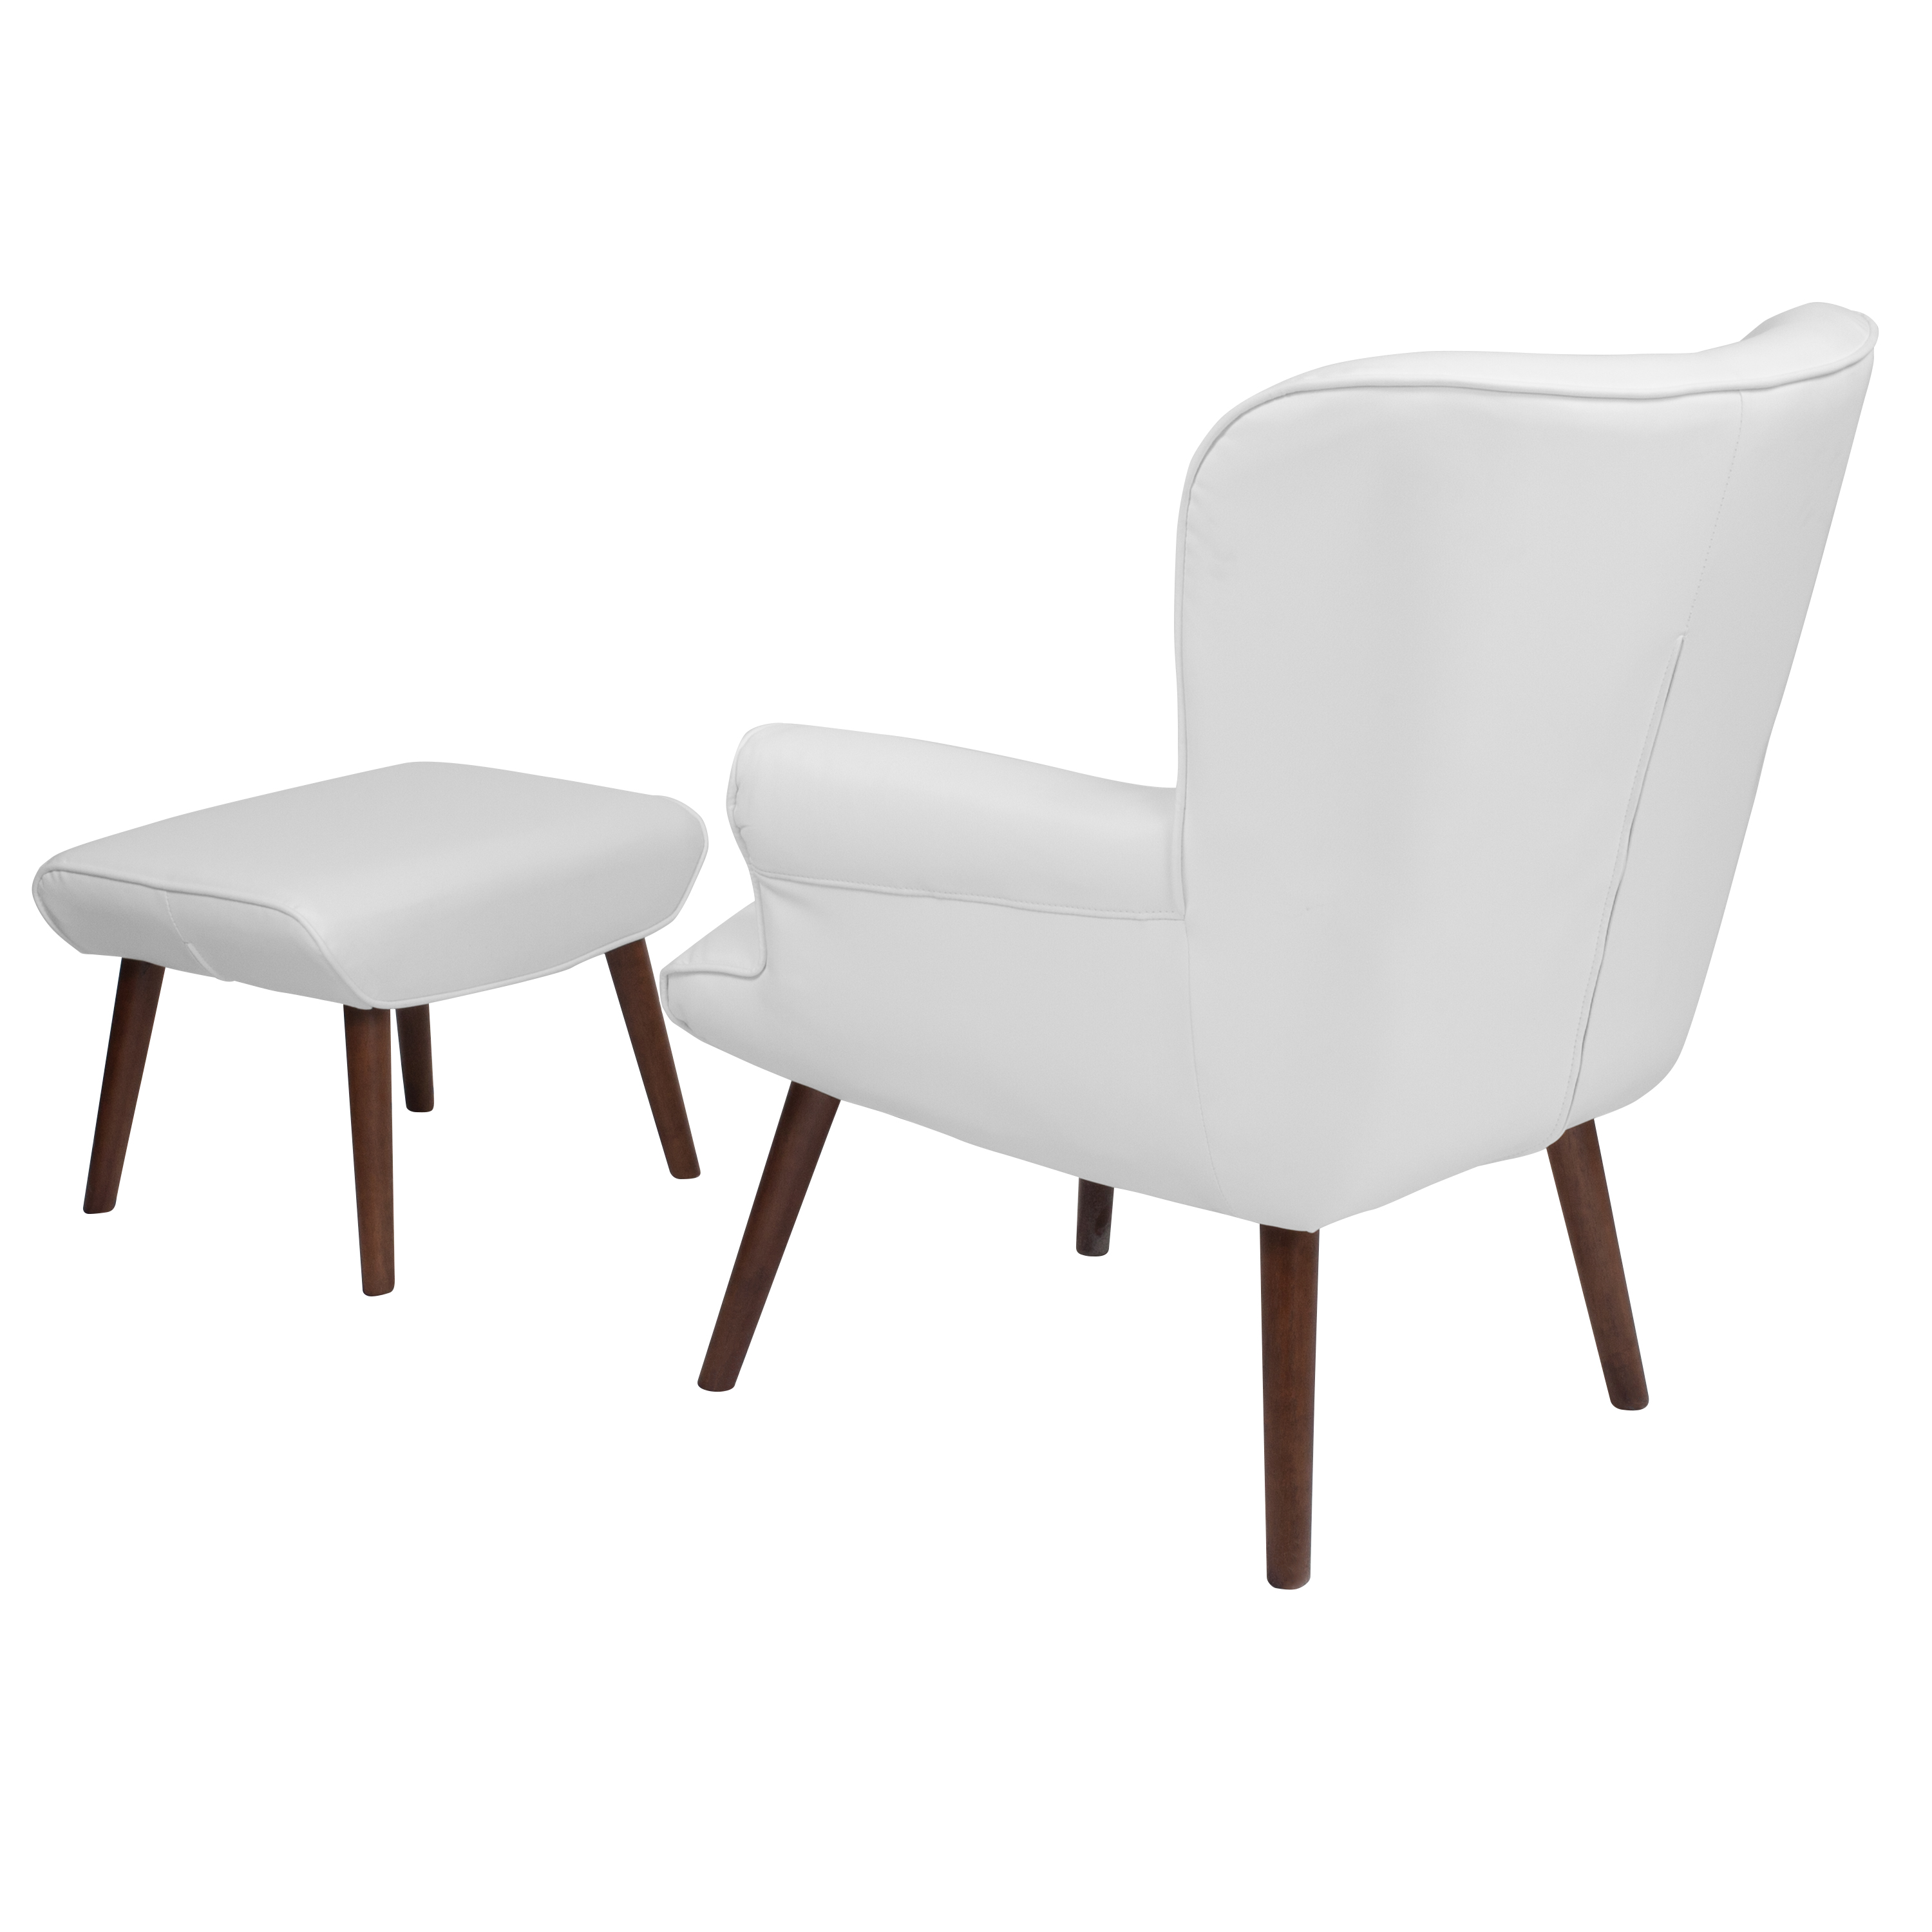 Flash Furniture Bayton Upholstered Wingback Chair with Ottoman in White LeatherSoft - image 2 of 4